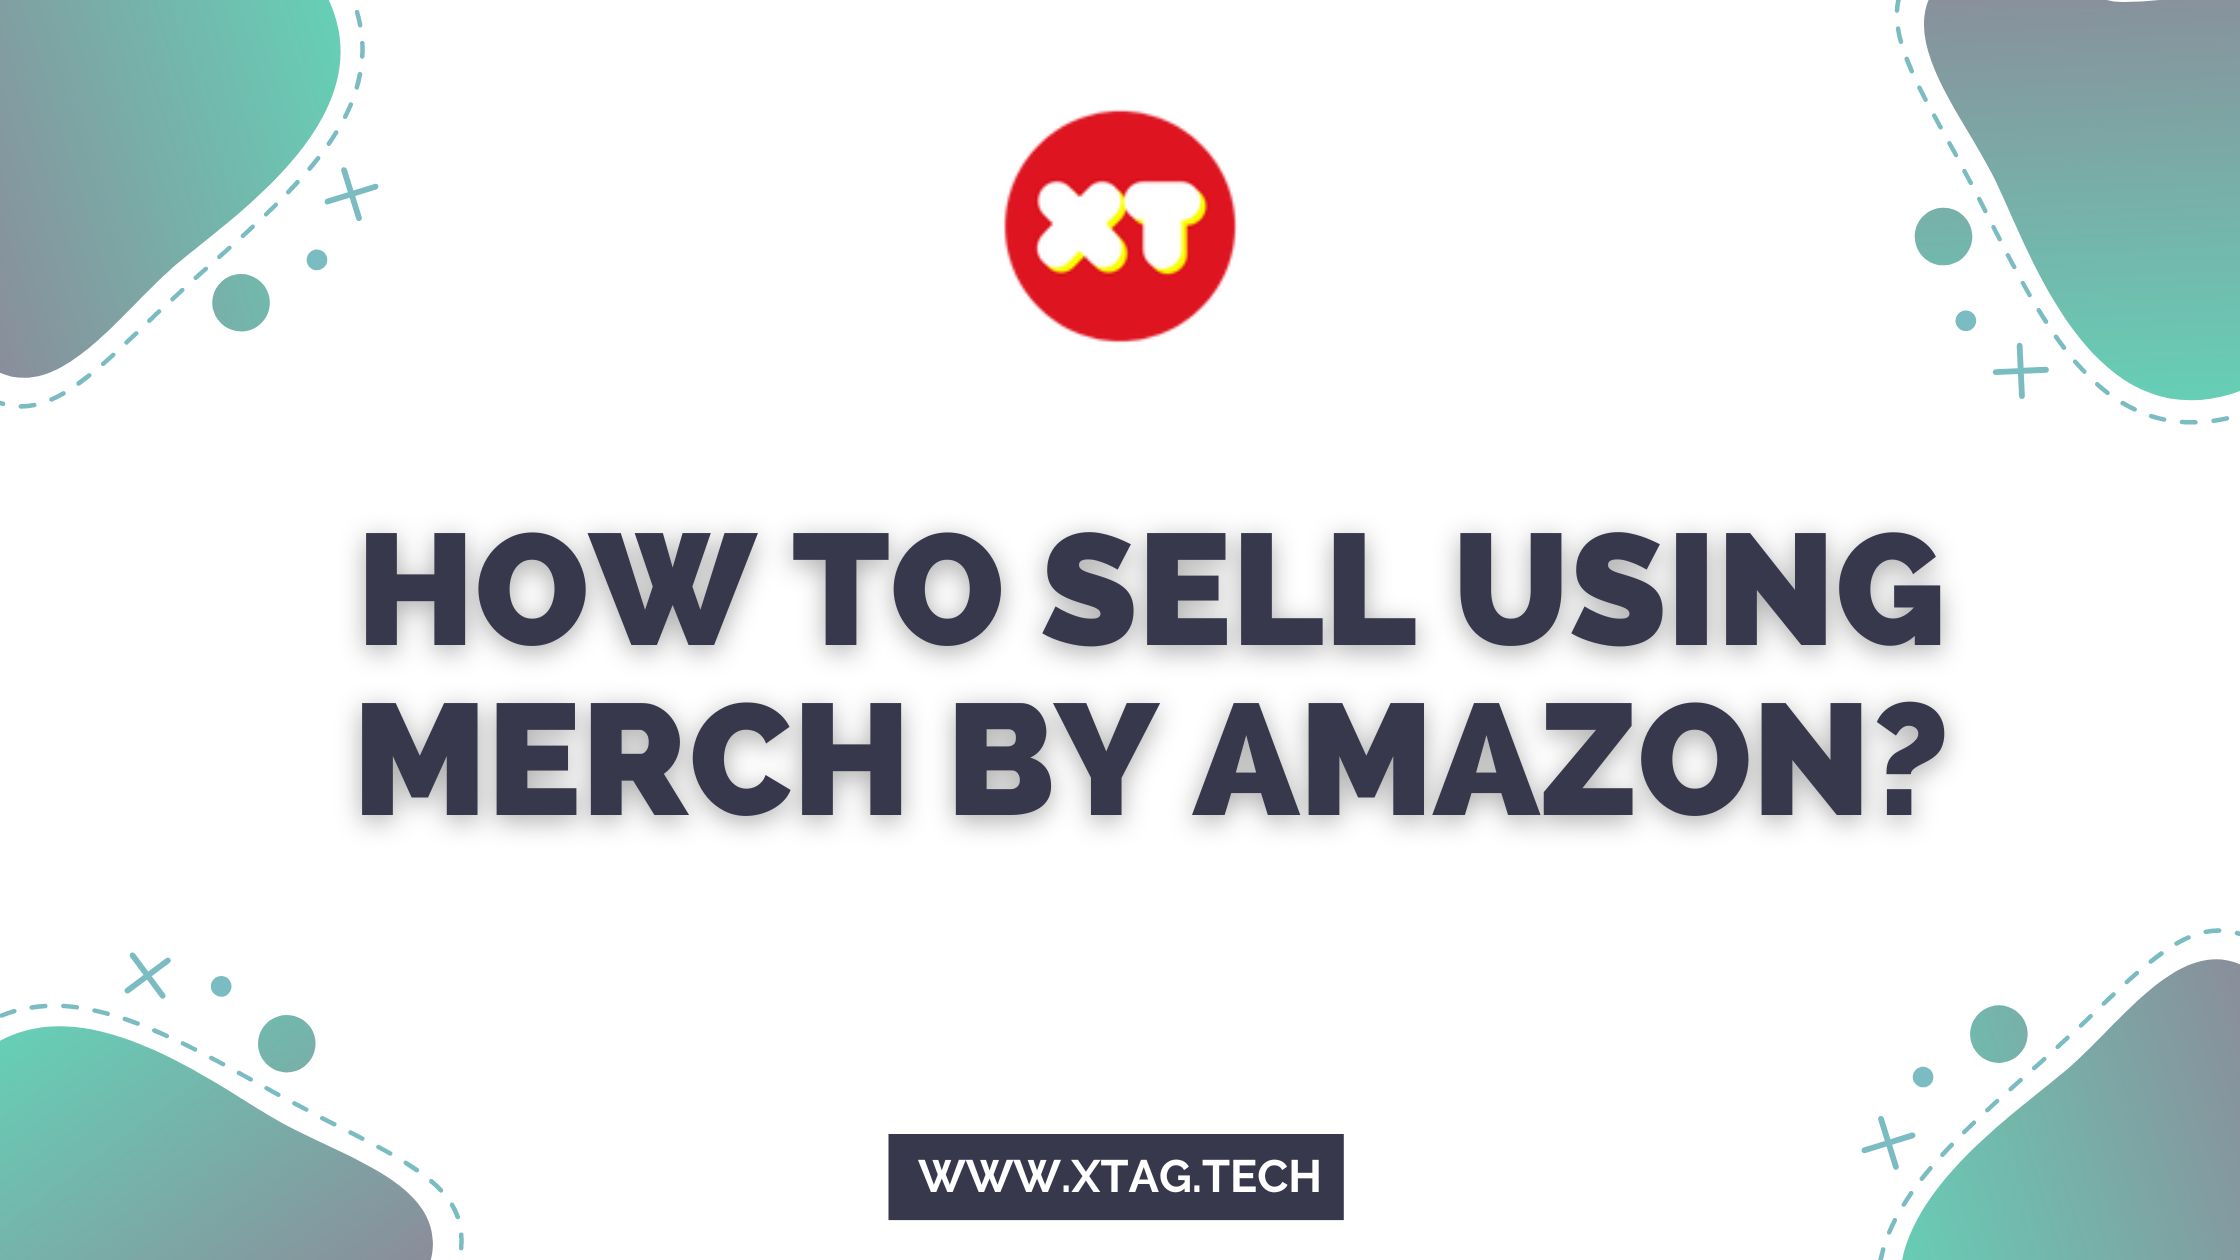 How To Sell Using Merch By Amazon?